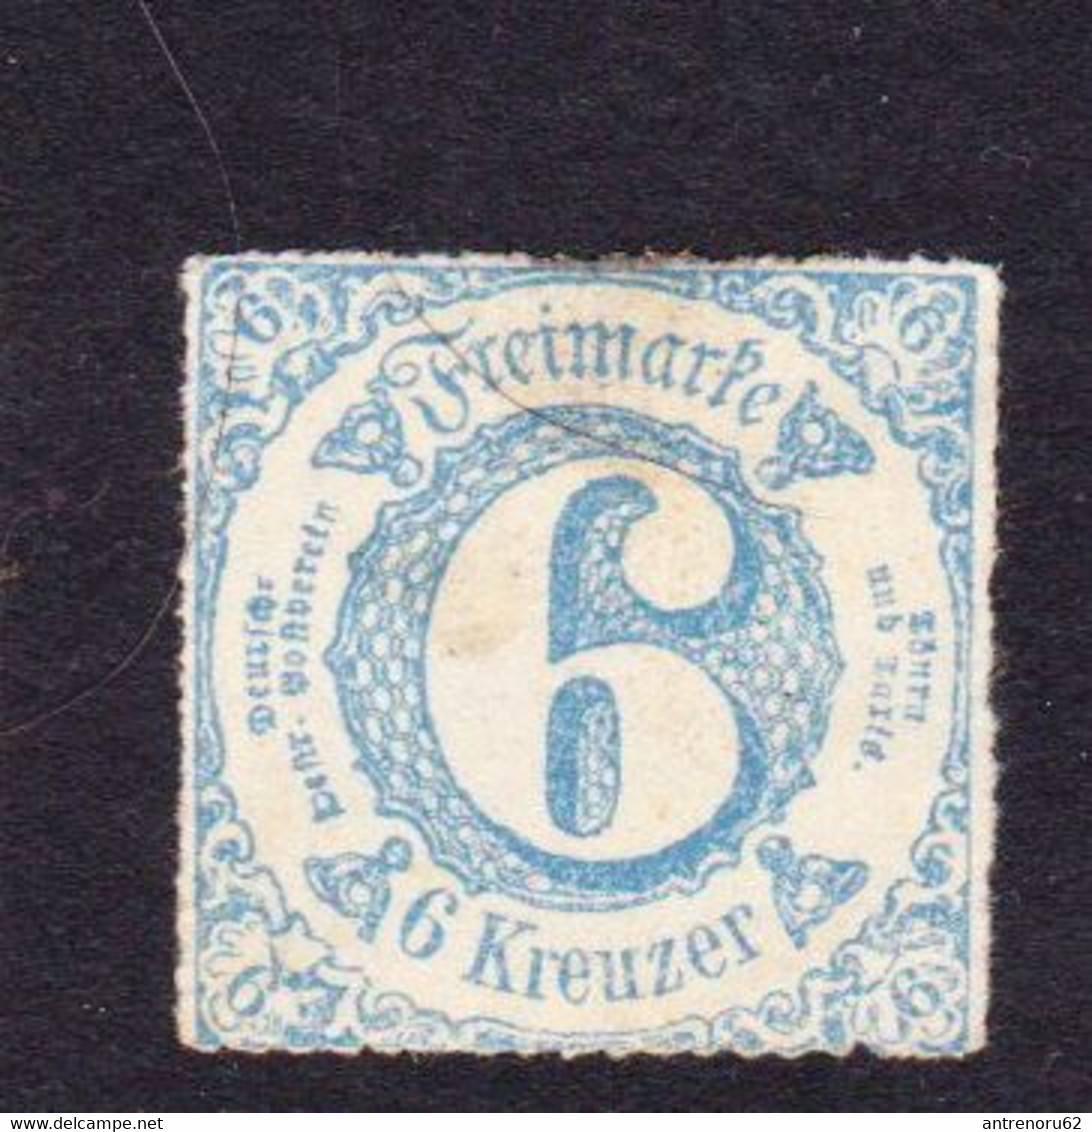 STAMPS-THURN-AND-TAXIS-1865-UNUSED-MH*-SEE-SCAN - Ungebraucht